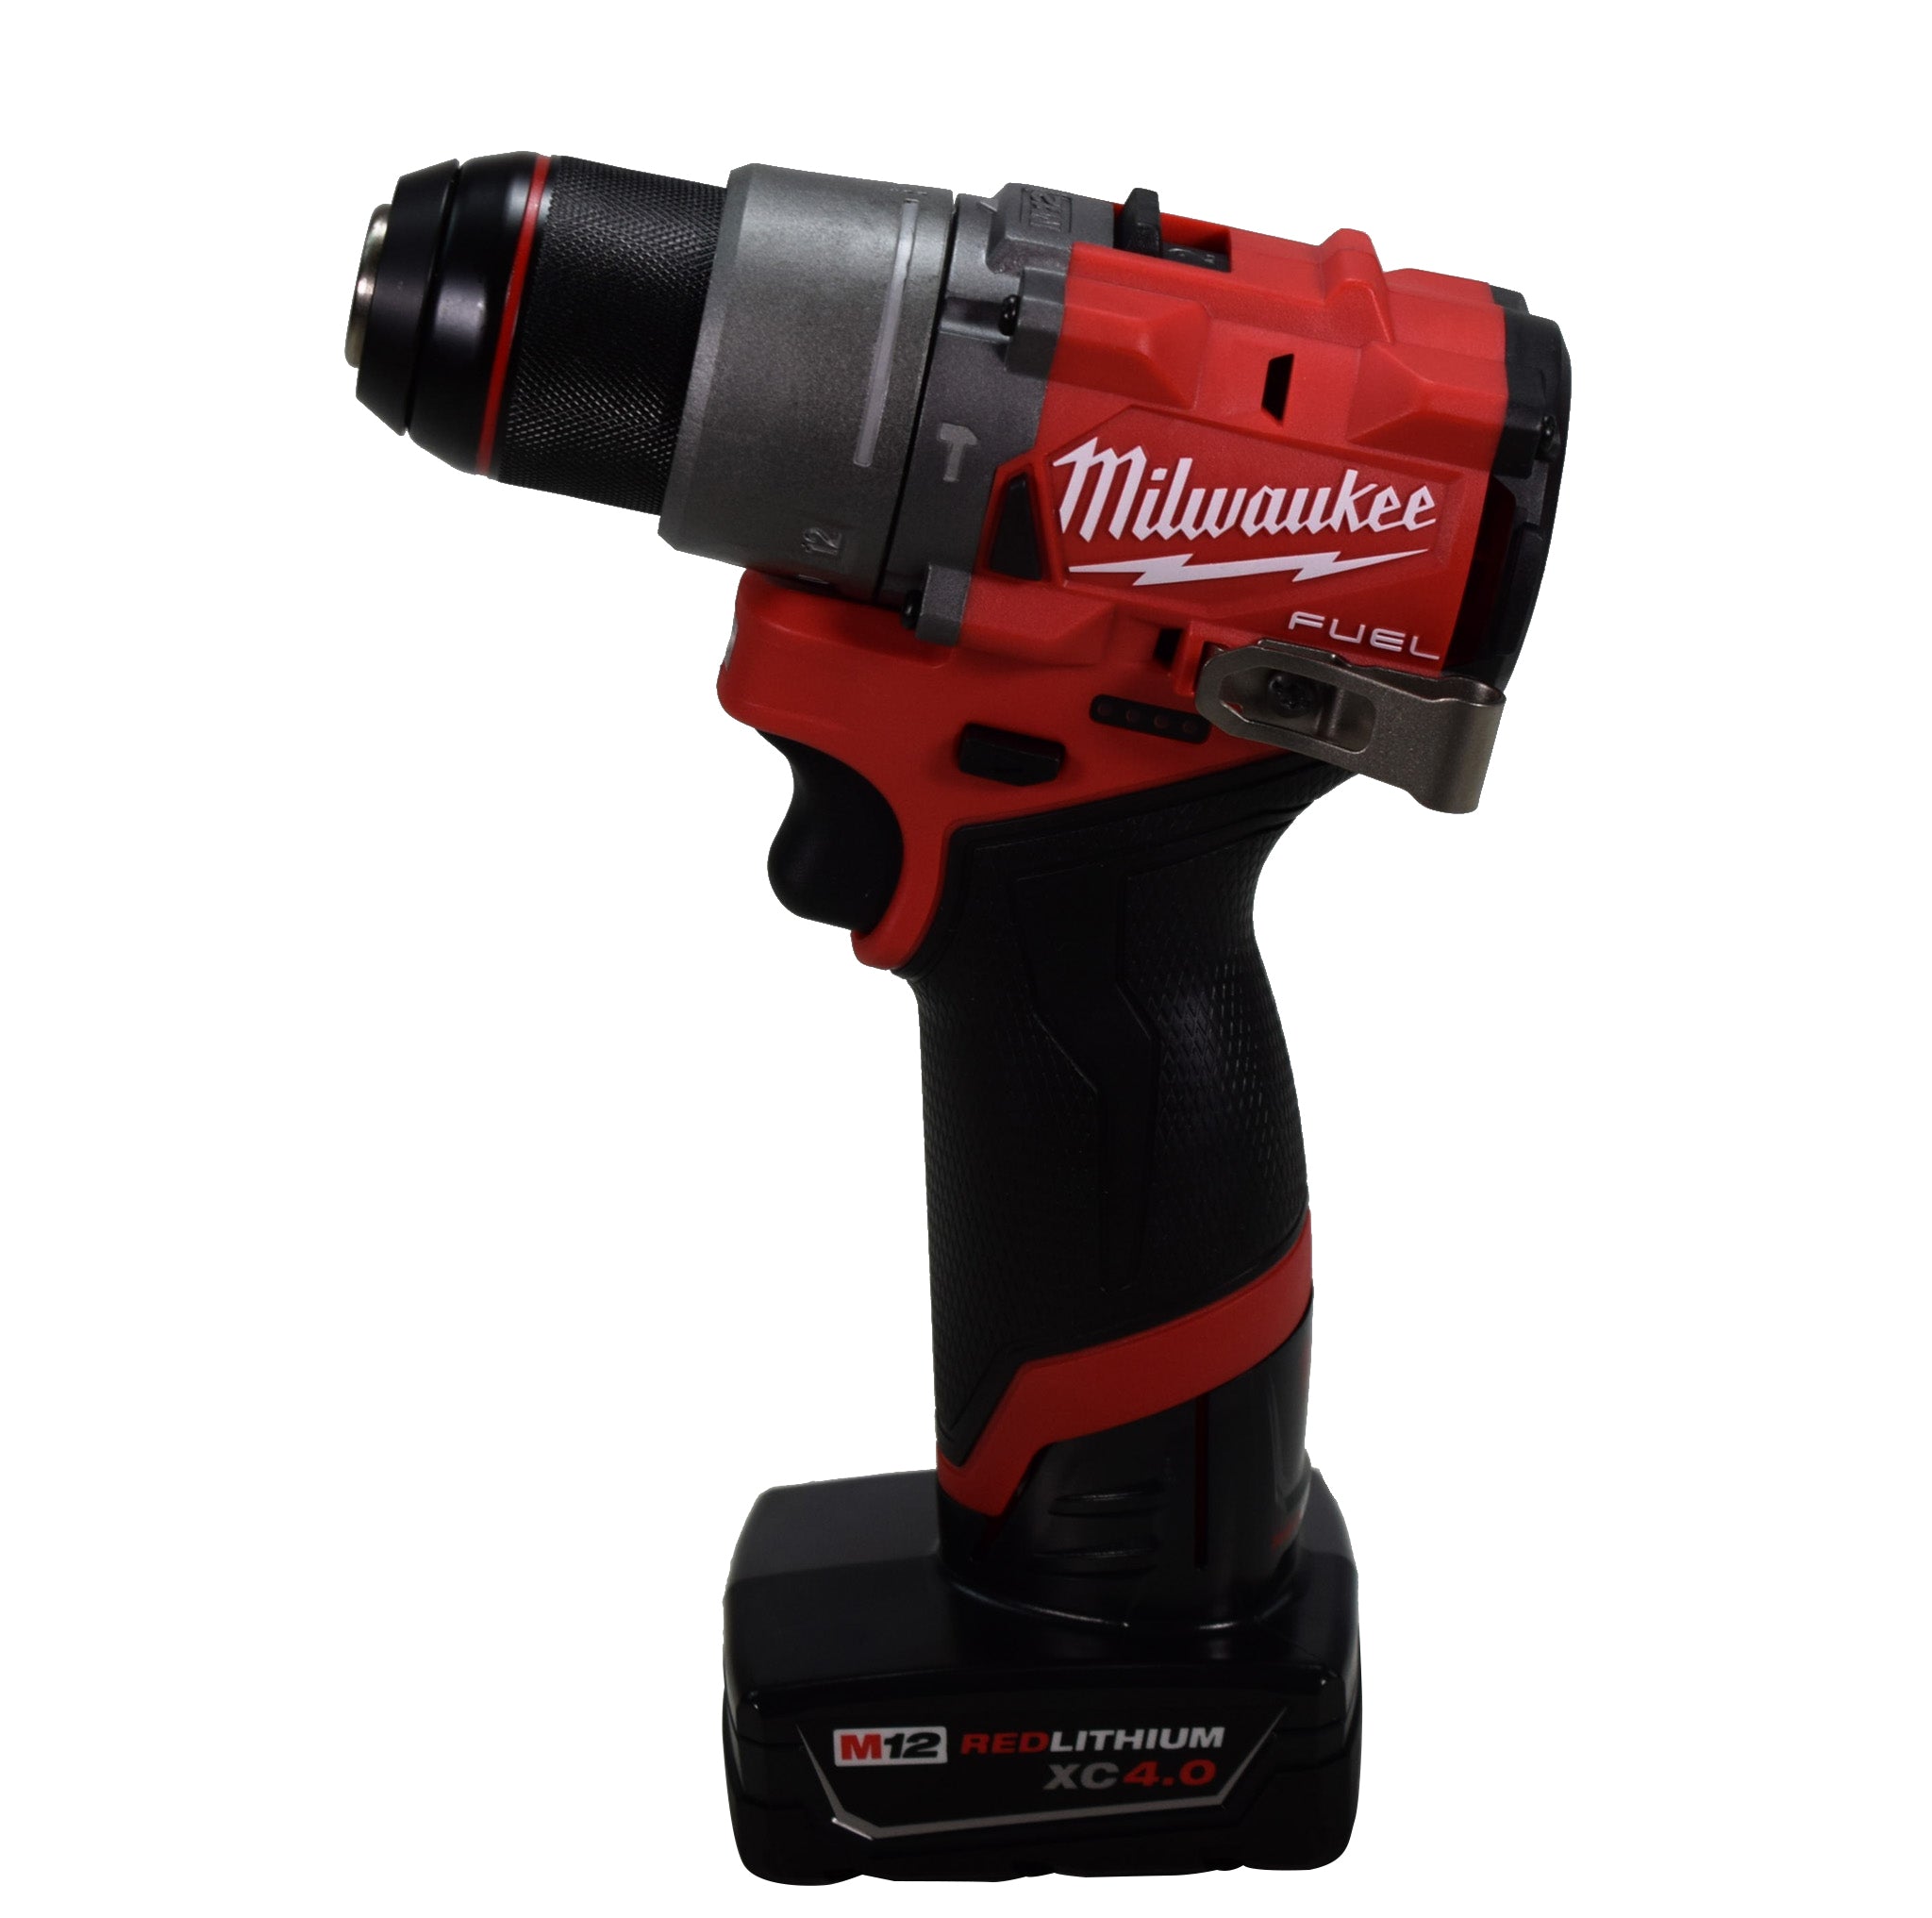 Milwaukee 3497-22 M12 FUEL 12-Volt Lithium-Ion Brushless Cordless Hammer Drill and Impact Driver Combo Kit w/2 Batteries and Bag (2-Tool)